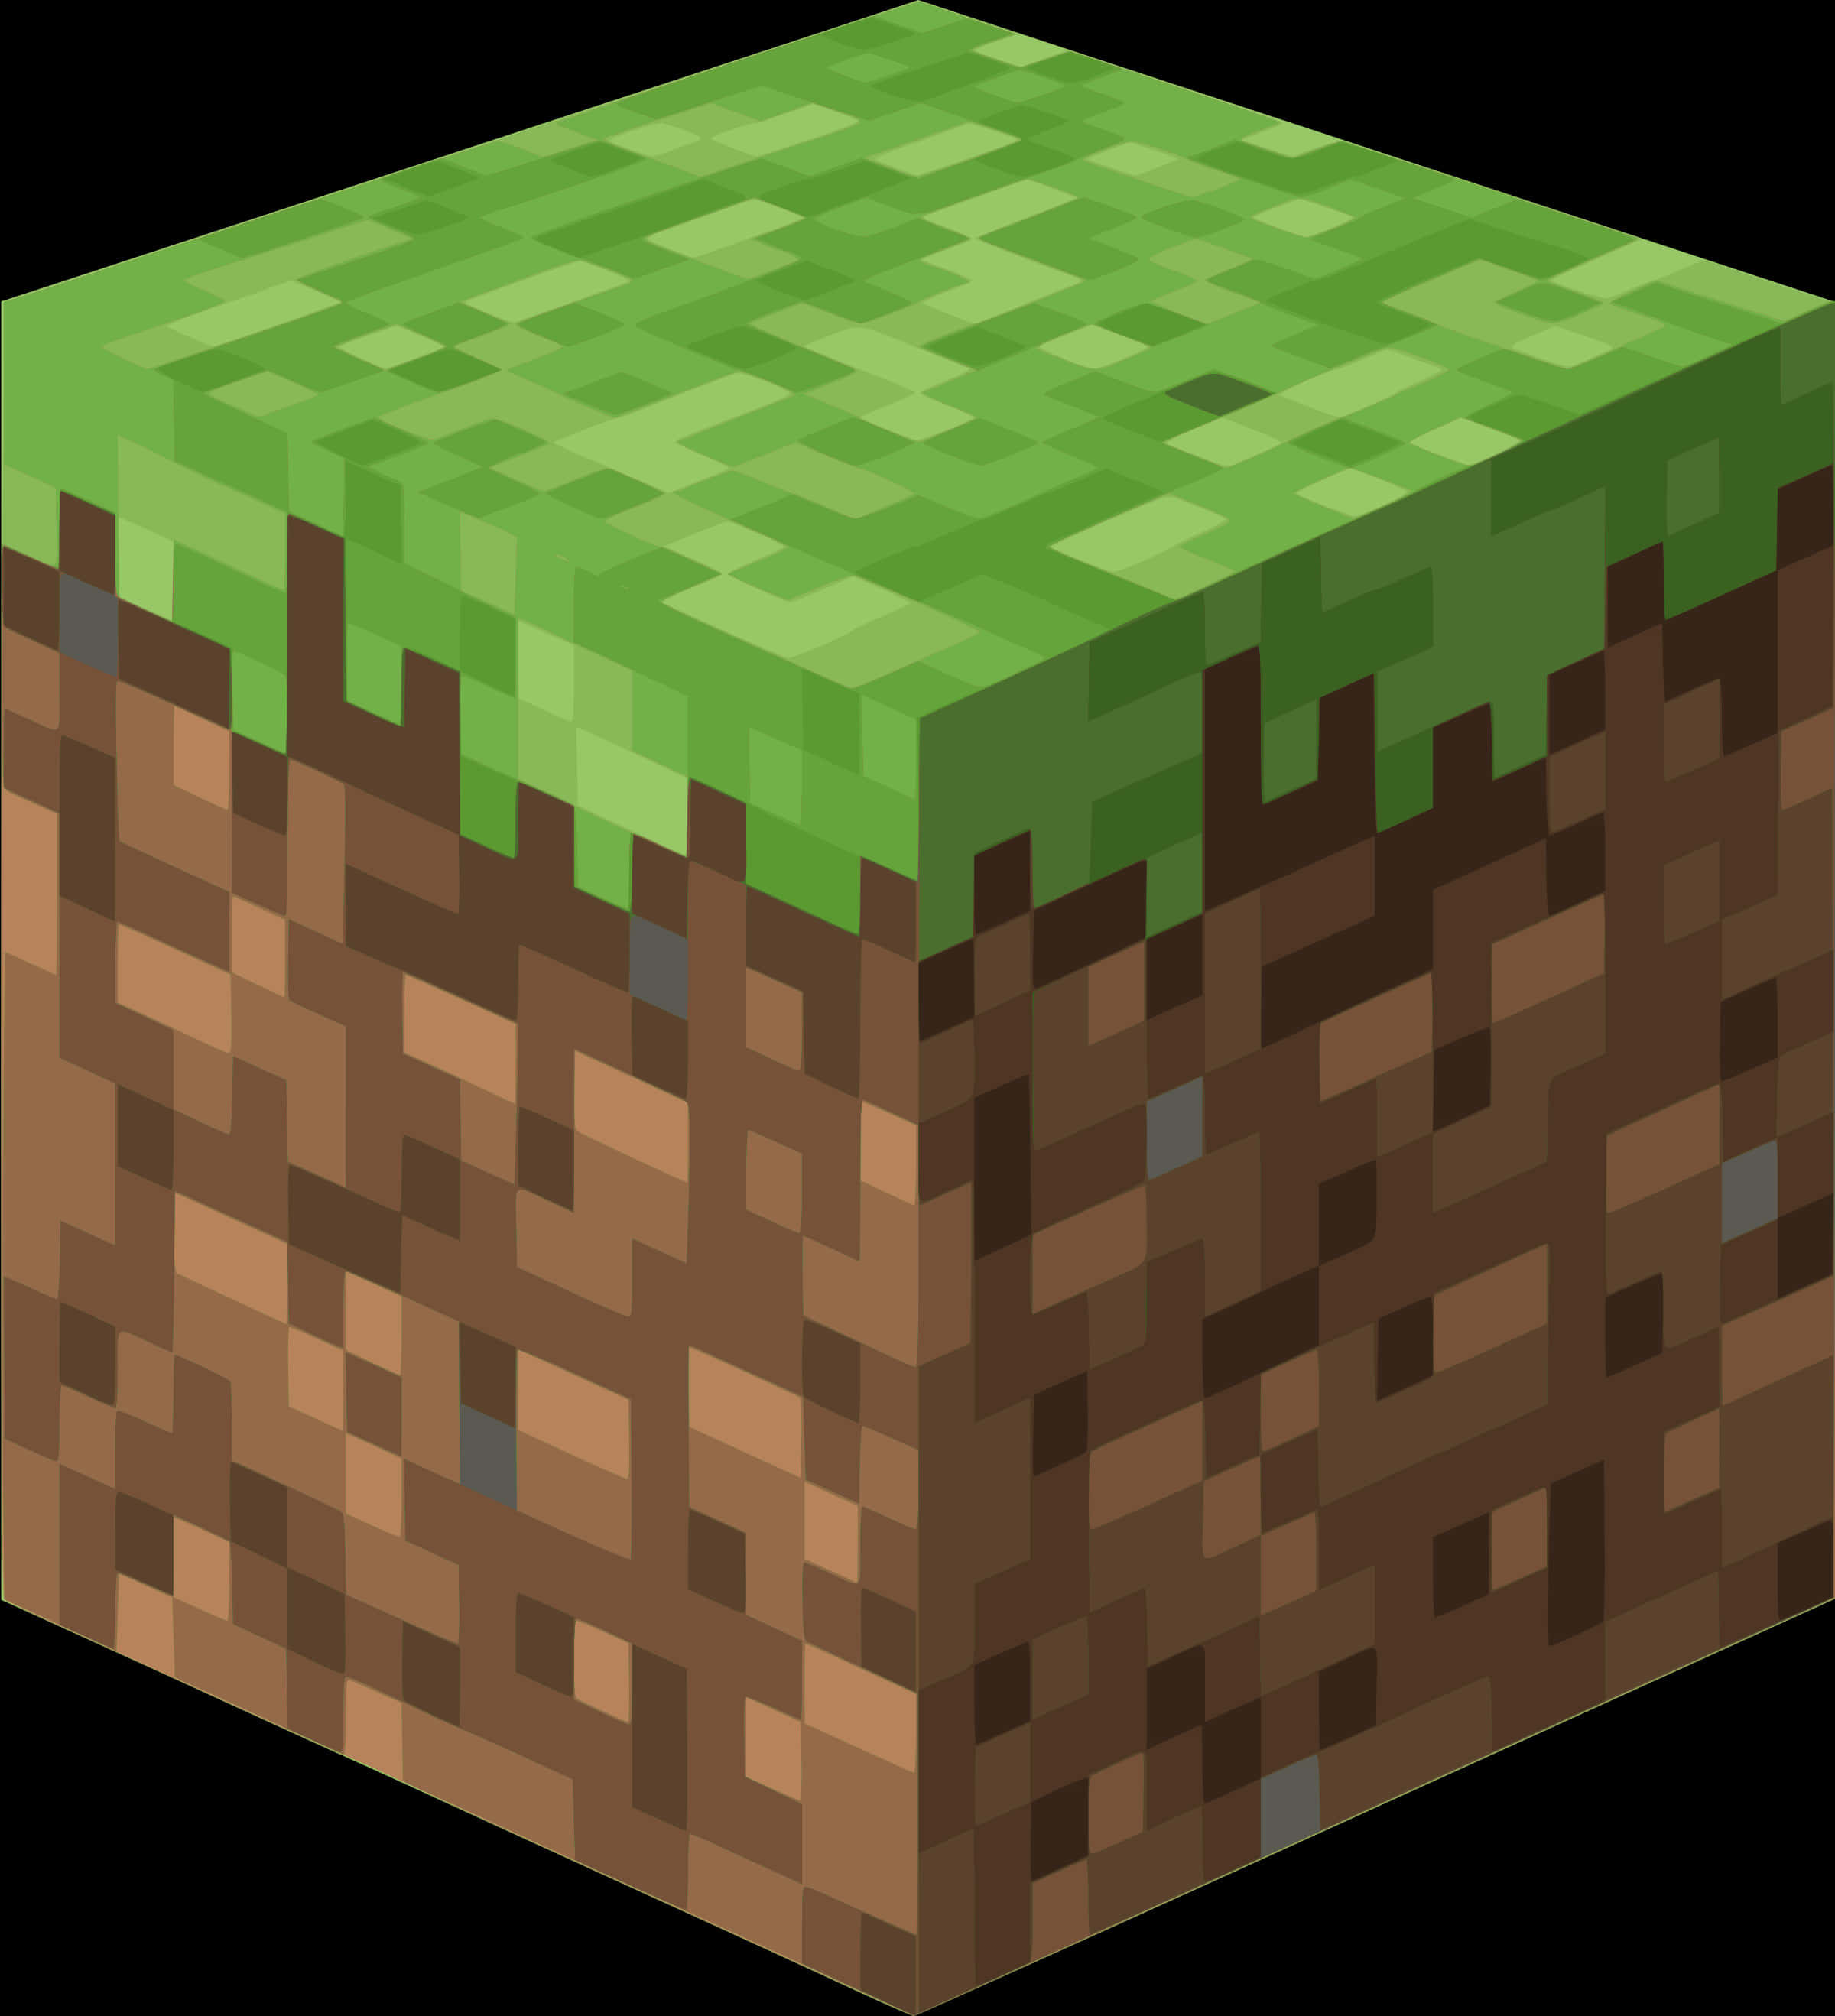 A Pixelated Cube With Green Grass